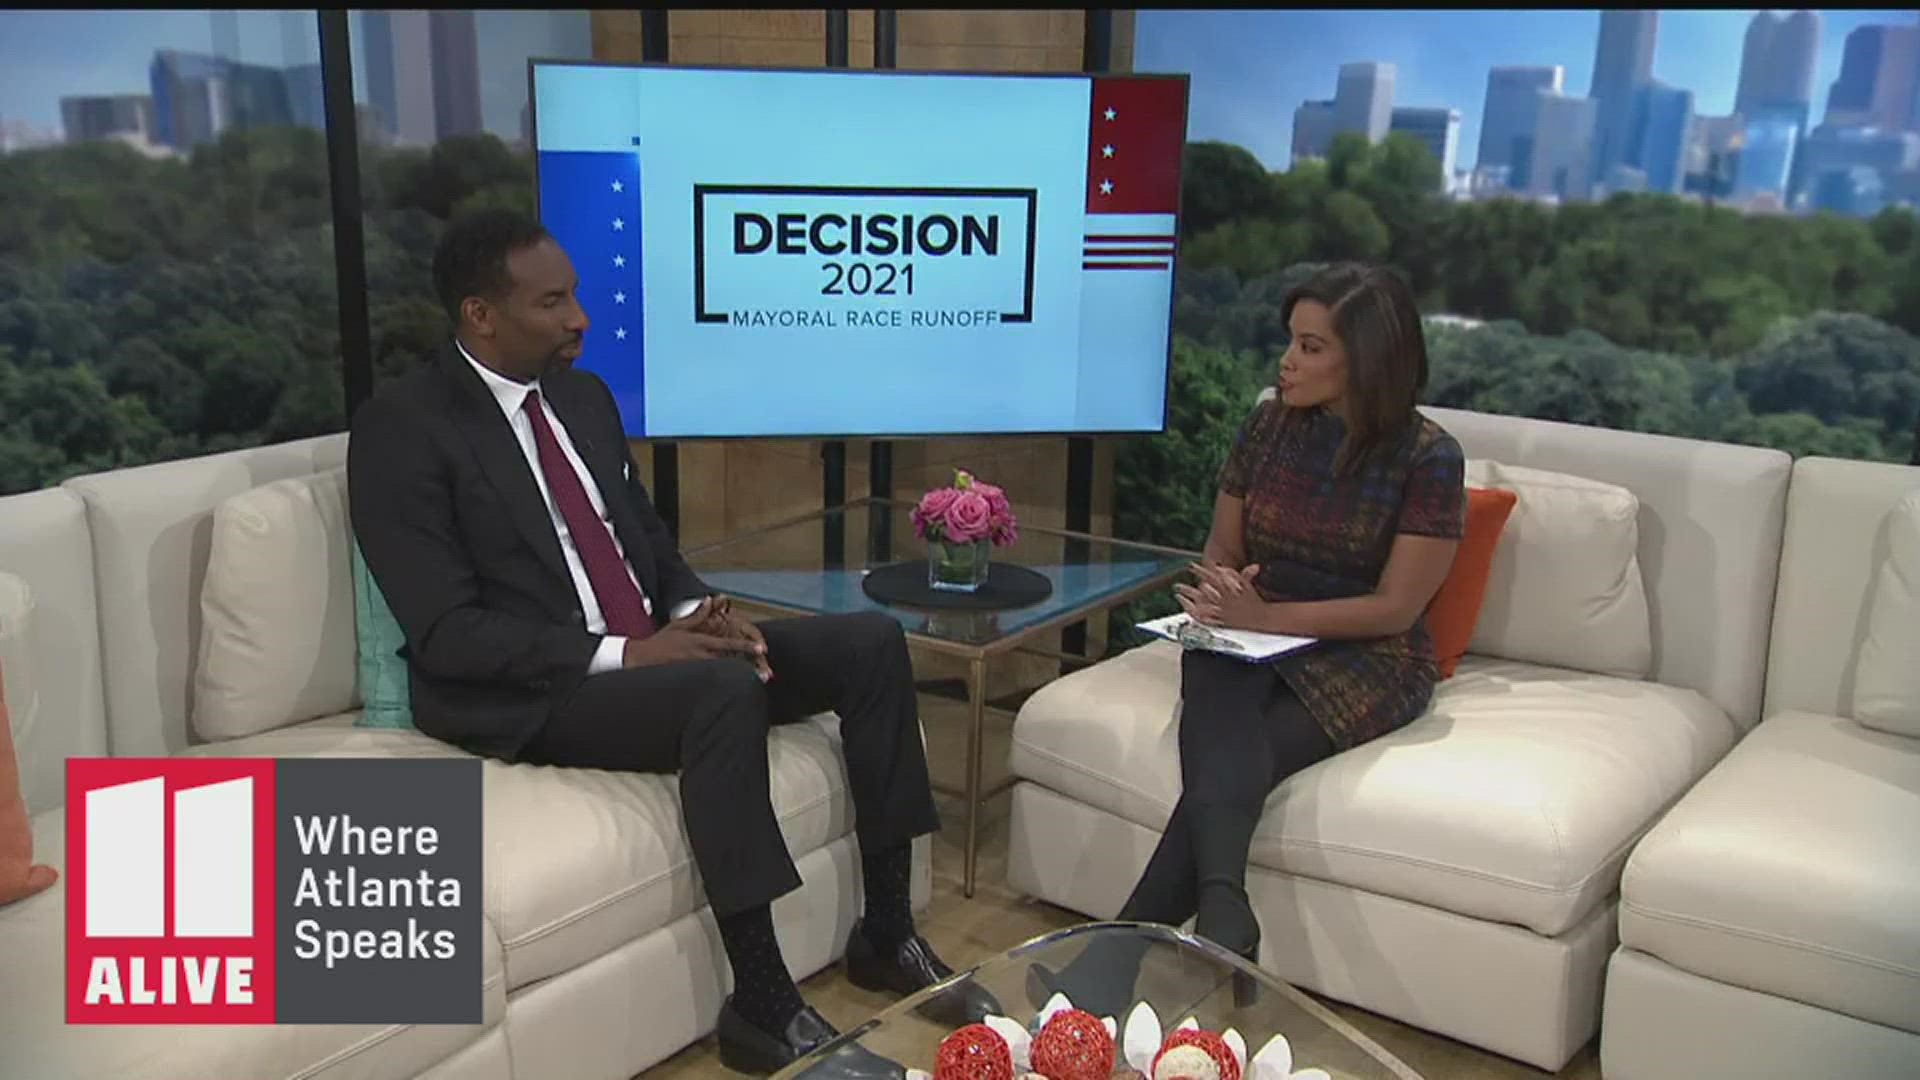 Dickens, who will face Felicia Moore in a runoff race for mayor on Nov. 30, talked with 11Alive about some top issues.